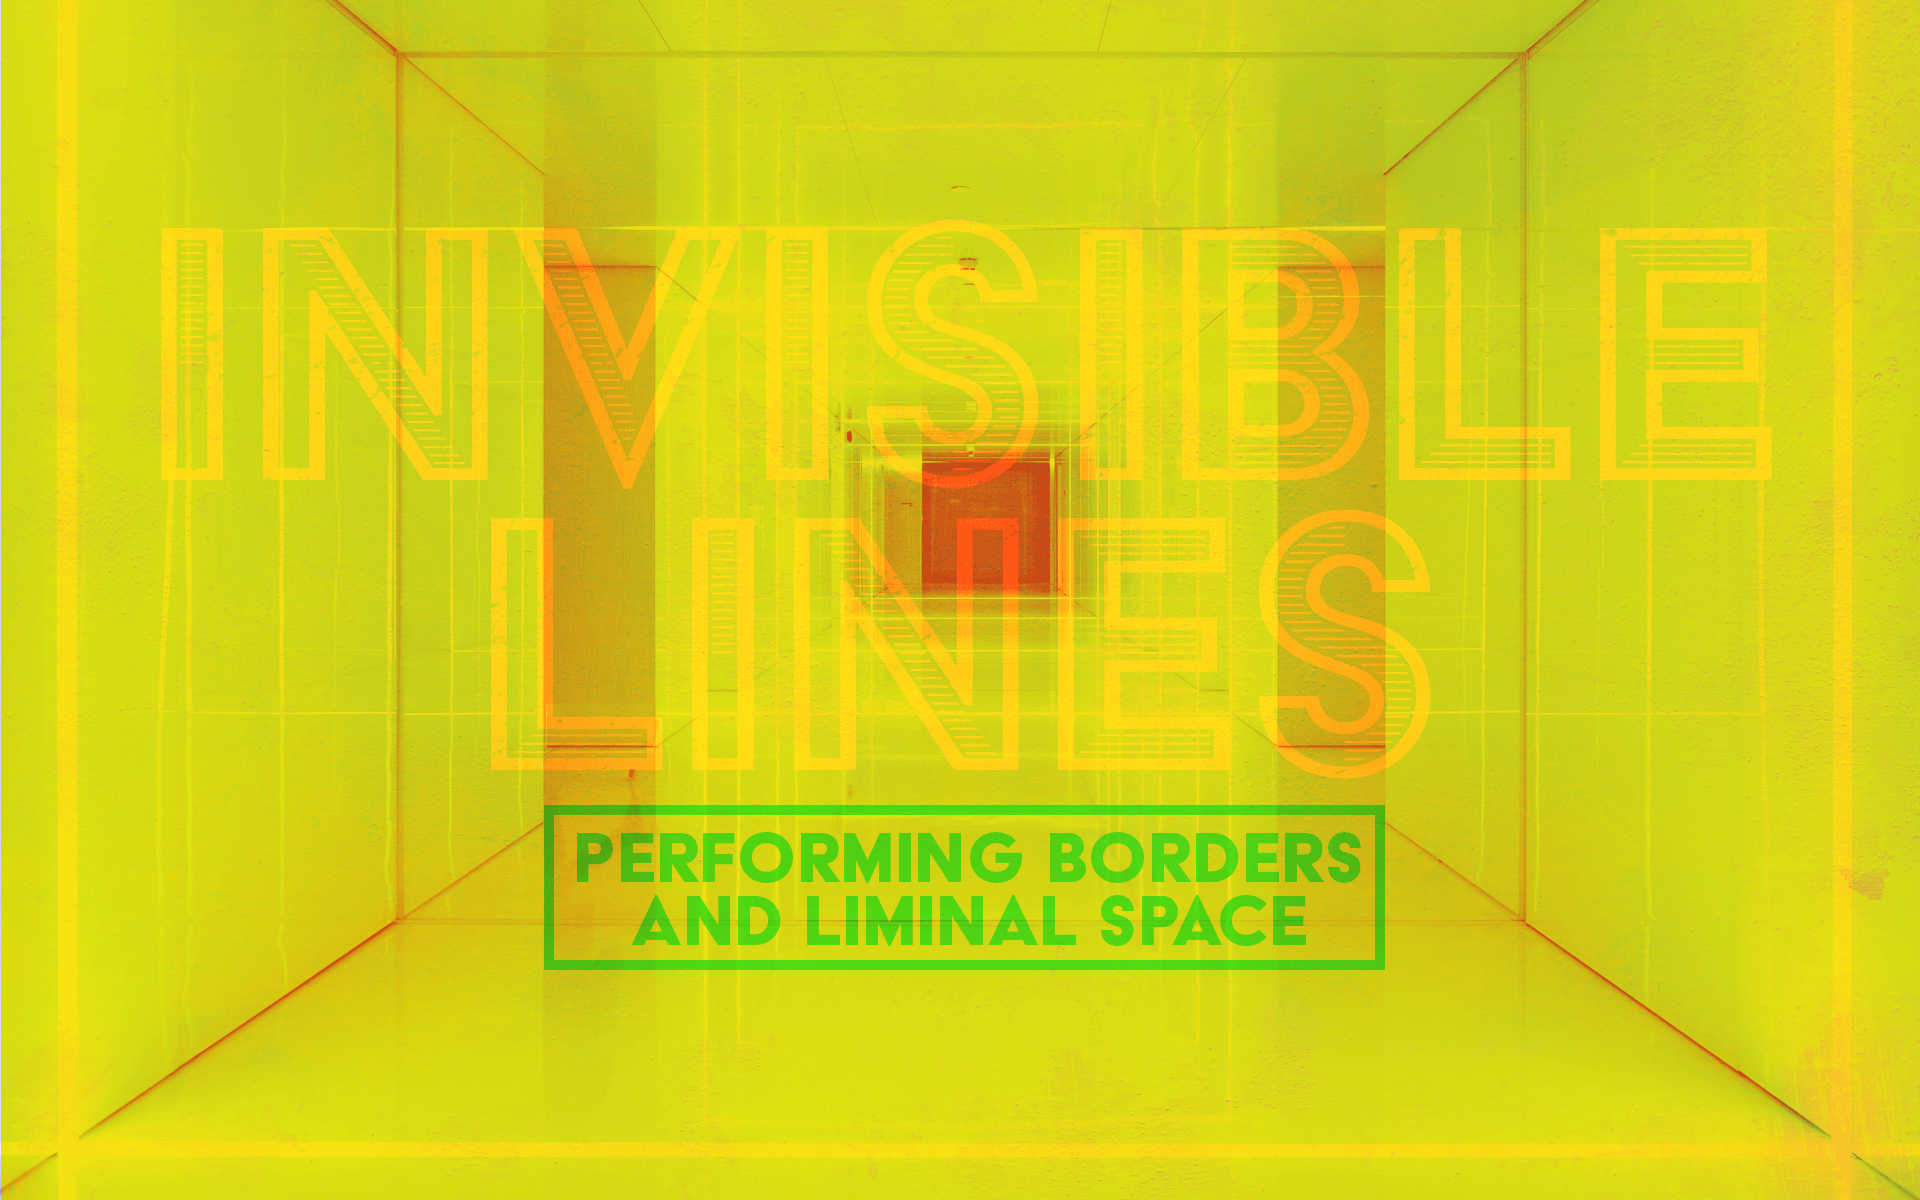 Issue.14: Invisible Lines: Performing Borders and Liminal Space